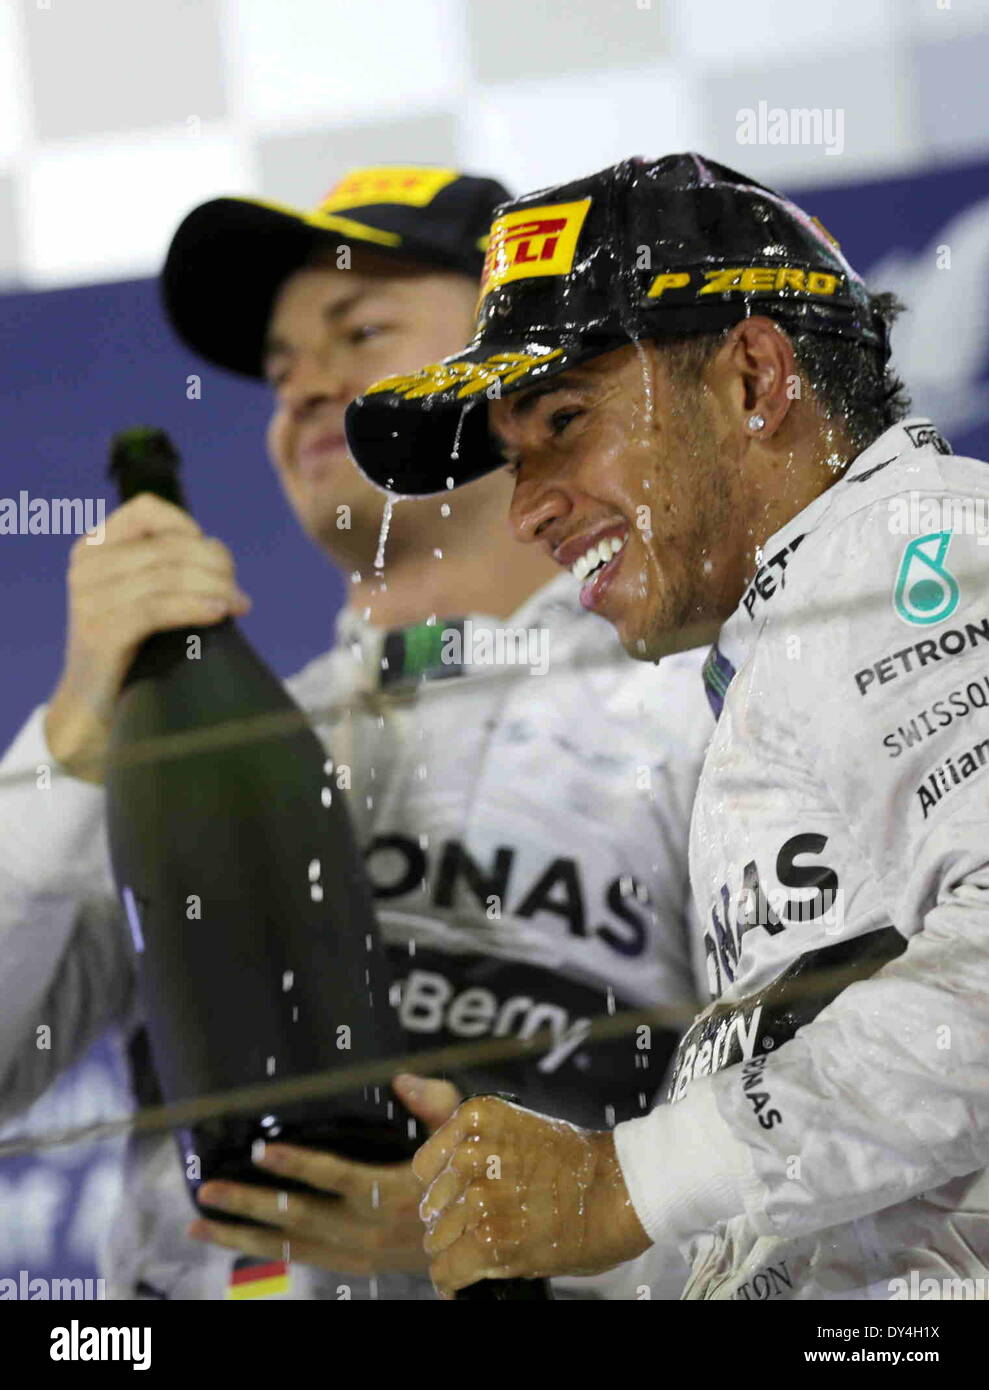 Manama, Bahrain. 06th Apr, 2014. Mercedes' Lewis Hamilton (R) and Nico Rosberg celebrate after the final of Formula 1 Bahrain Grand Prix in Manama, Bahrain, on April 6, 2014. Hamilton won the title with 1 hour 39 minutes and 42.743 seconds.  Credit:  Hasan Jamali/Xinhua/Alamy Live News Stock Photo